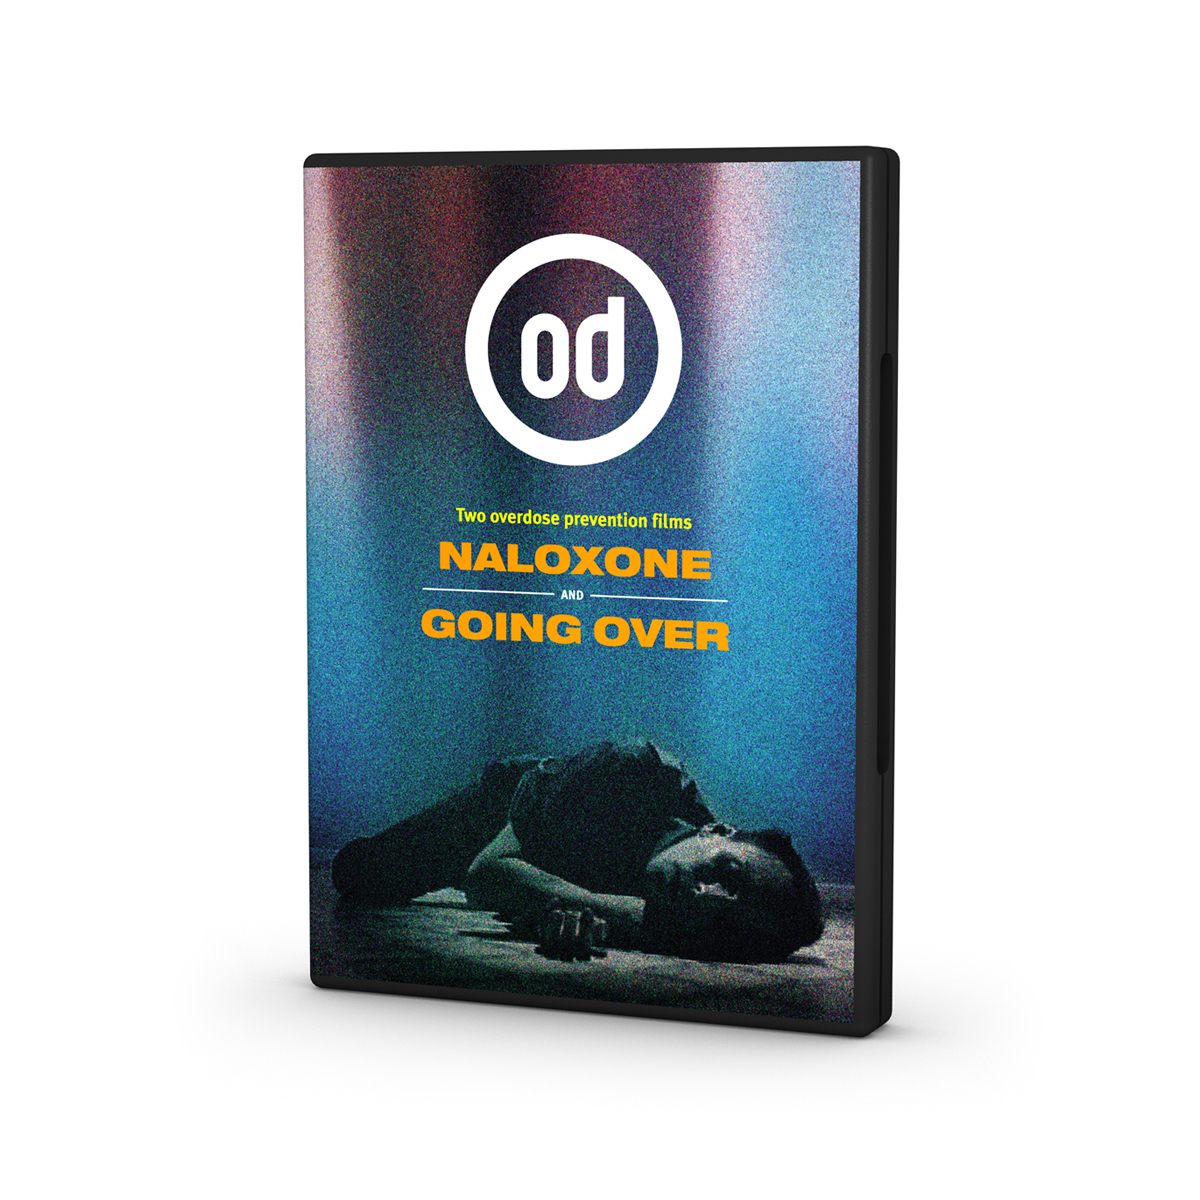 Naloxone and Going Over DVD (display case) - no longer available